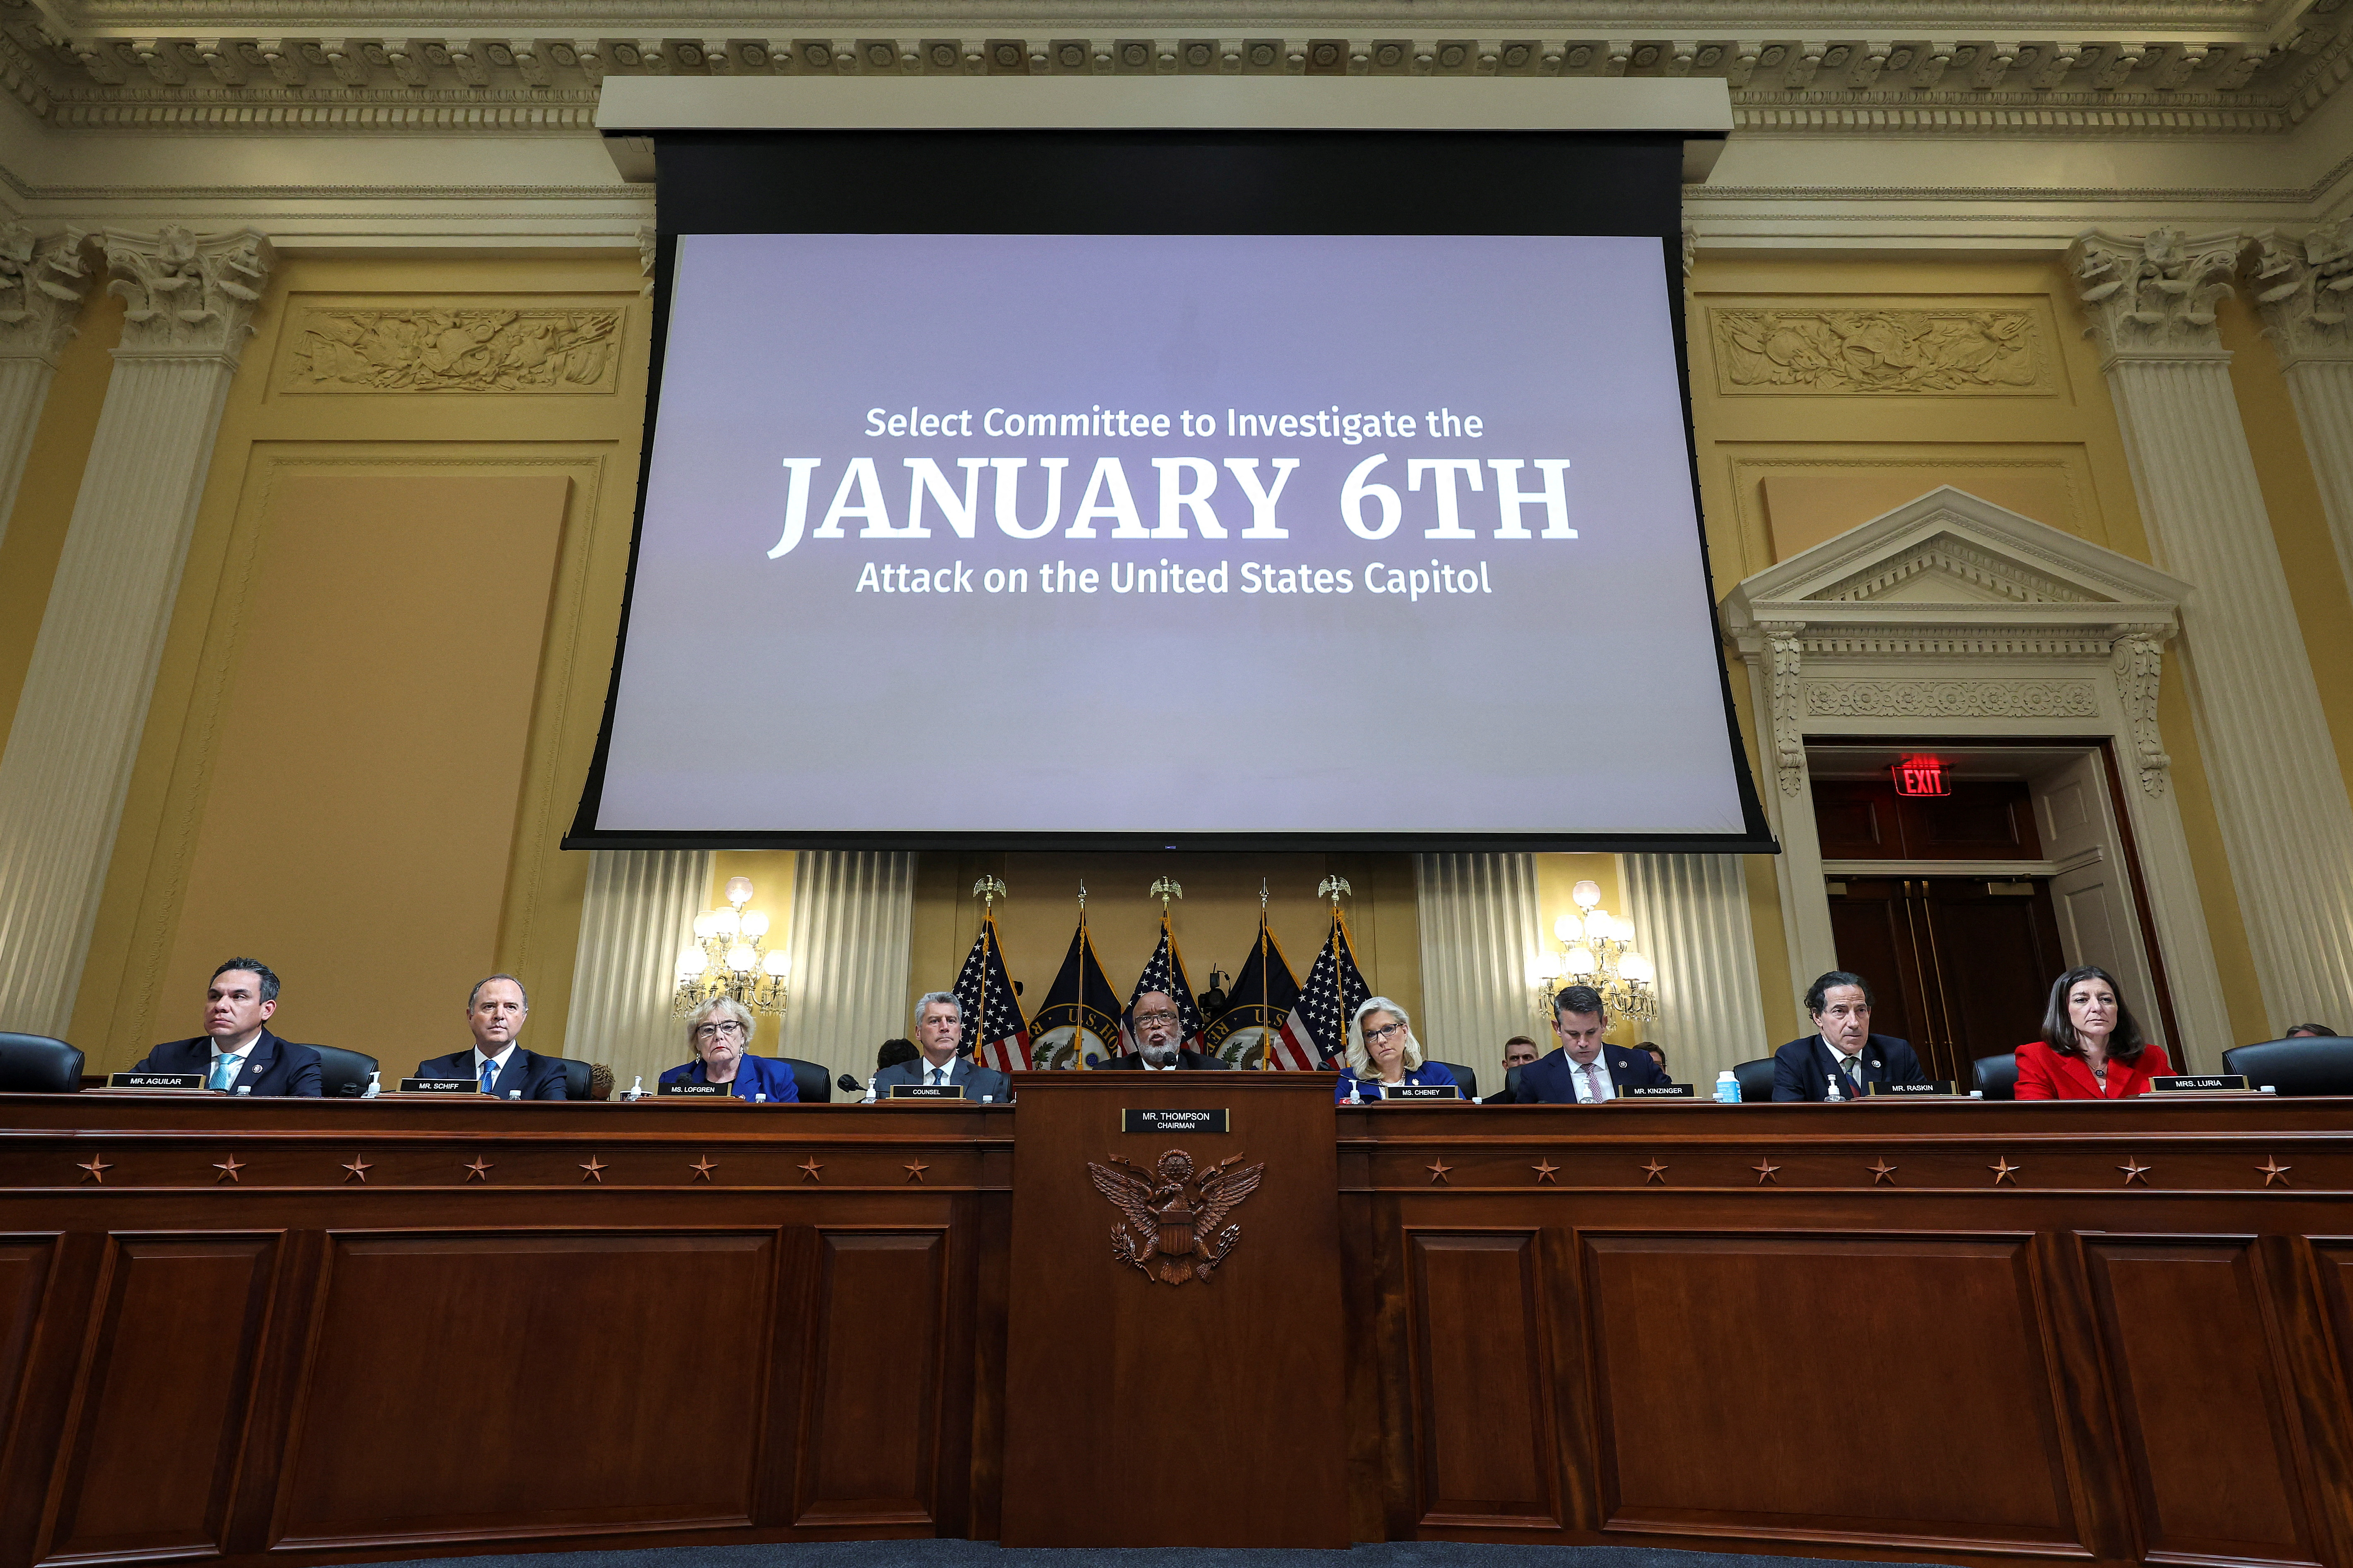 U.S. House Select Committee holds public hearings on Jan. 6, 2021 assault on Capitol in Washington